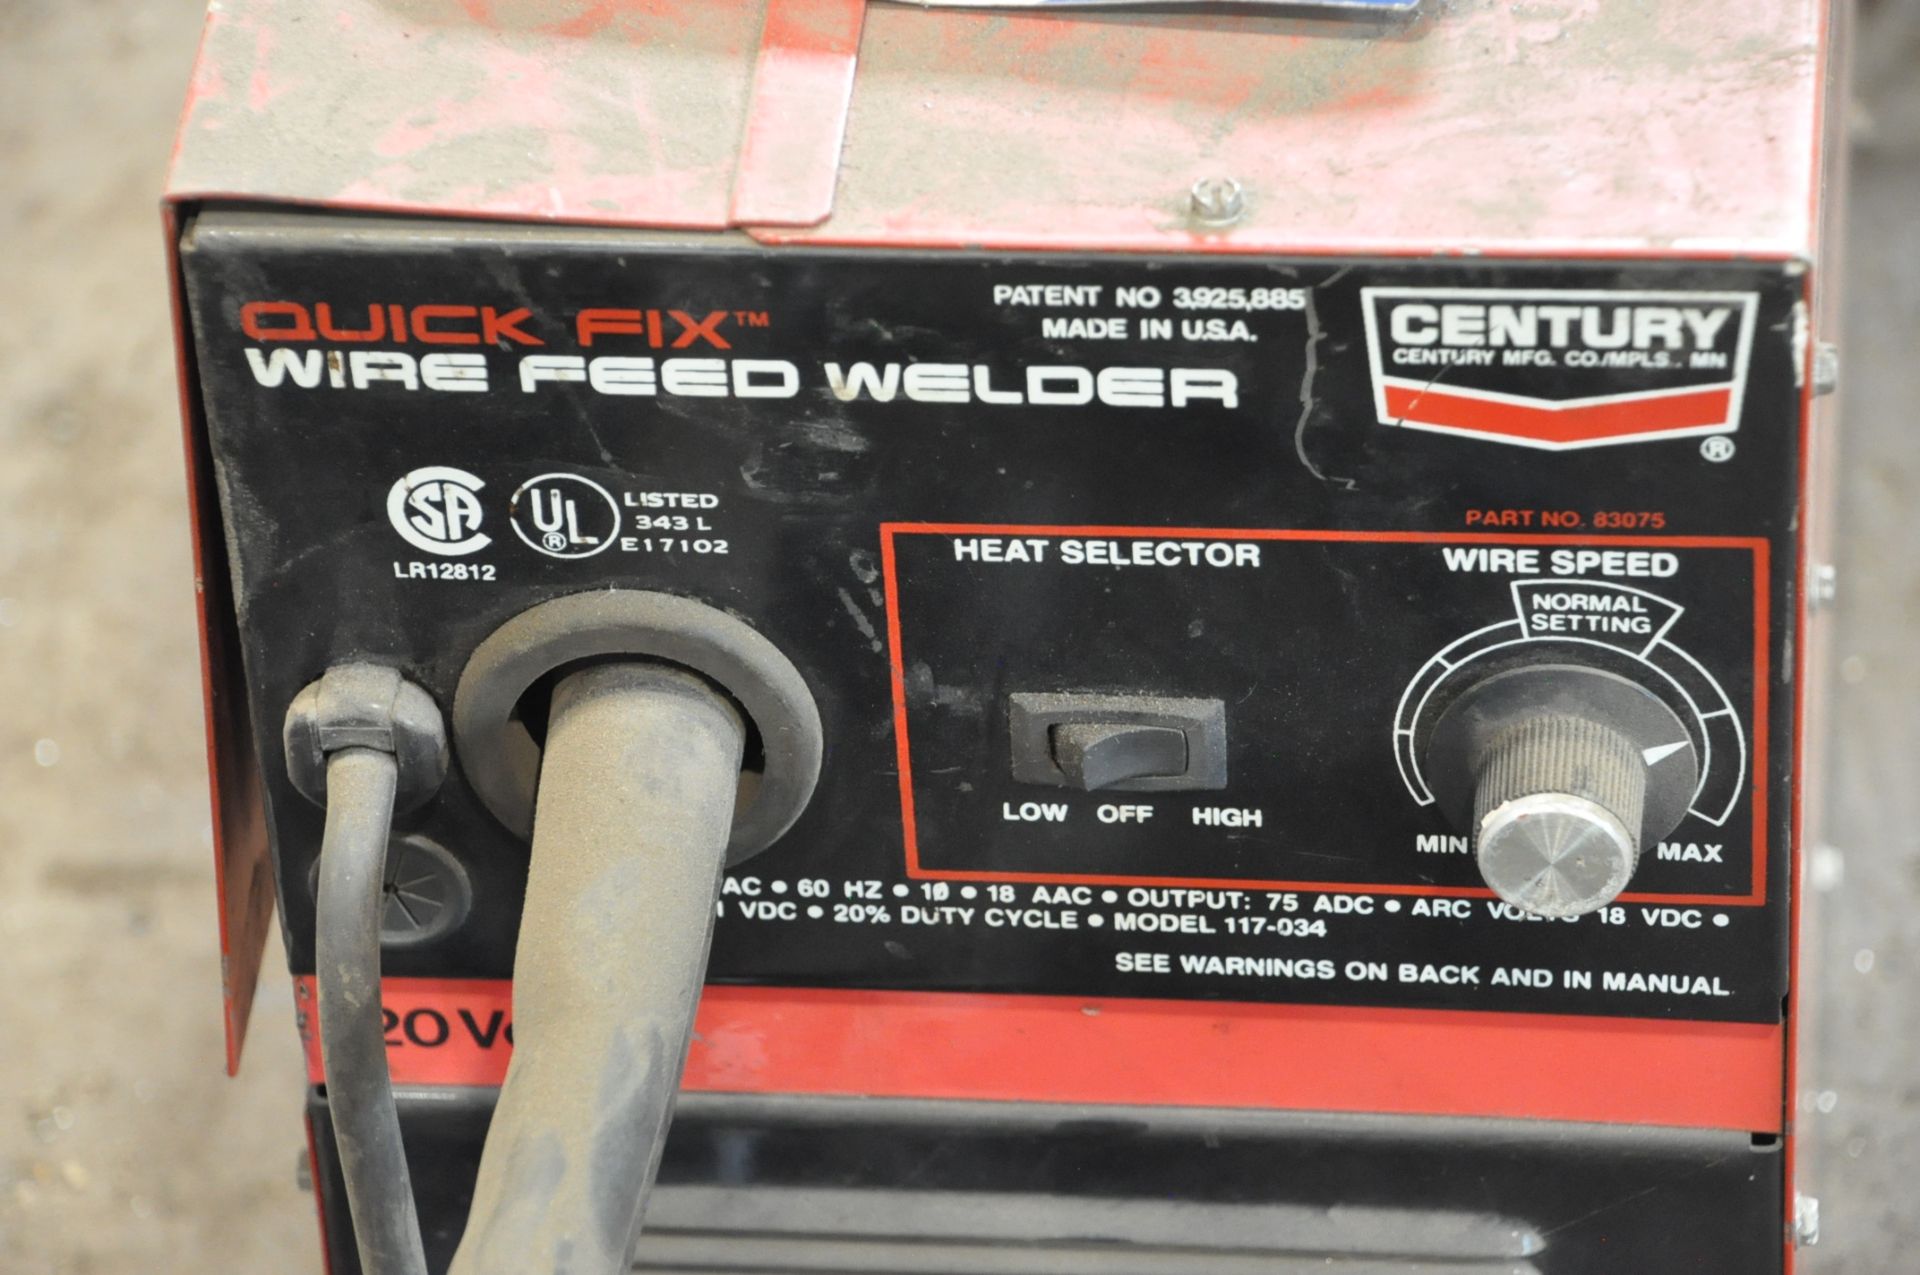 Century Model 117-034-901, Quick Fix Wire Feed Welder, S/n 0998502, with Leads, 120-Volt 1-PH - Image 2 of 3